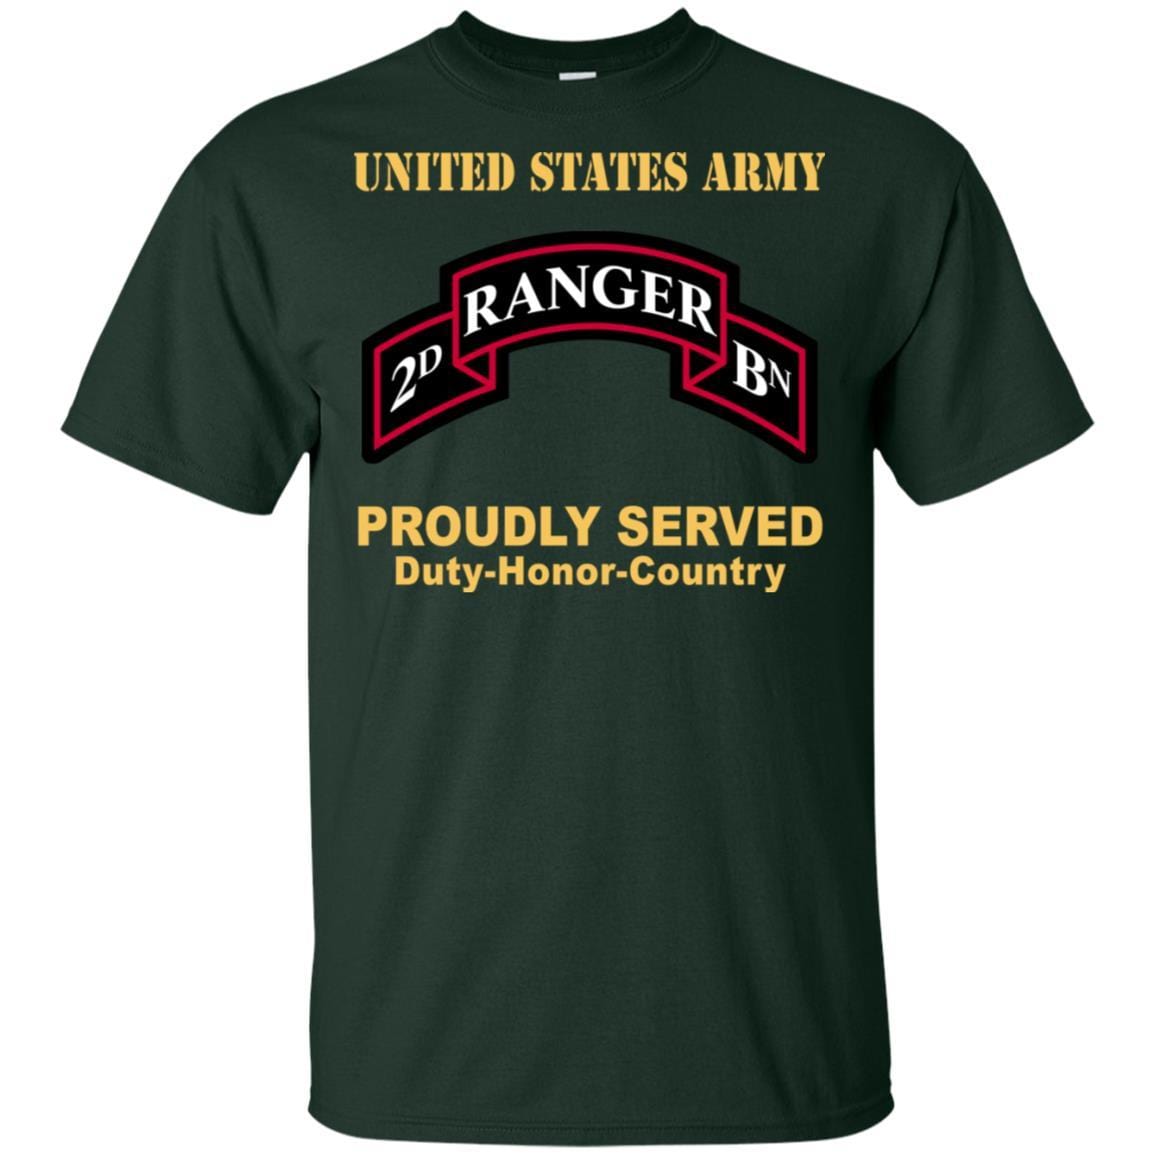 US ARMY 75TH RANGER REGIMENT 2ND BATTALION - Proudly Served T-Shirt On Front For Men-TShirt-Army-Veterans Nation